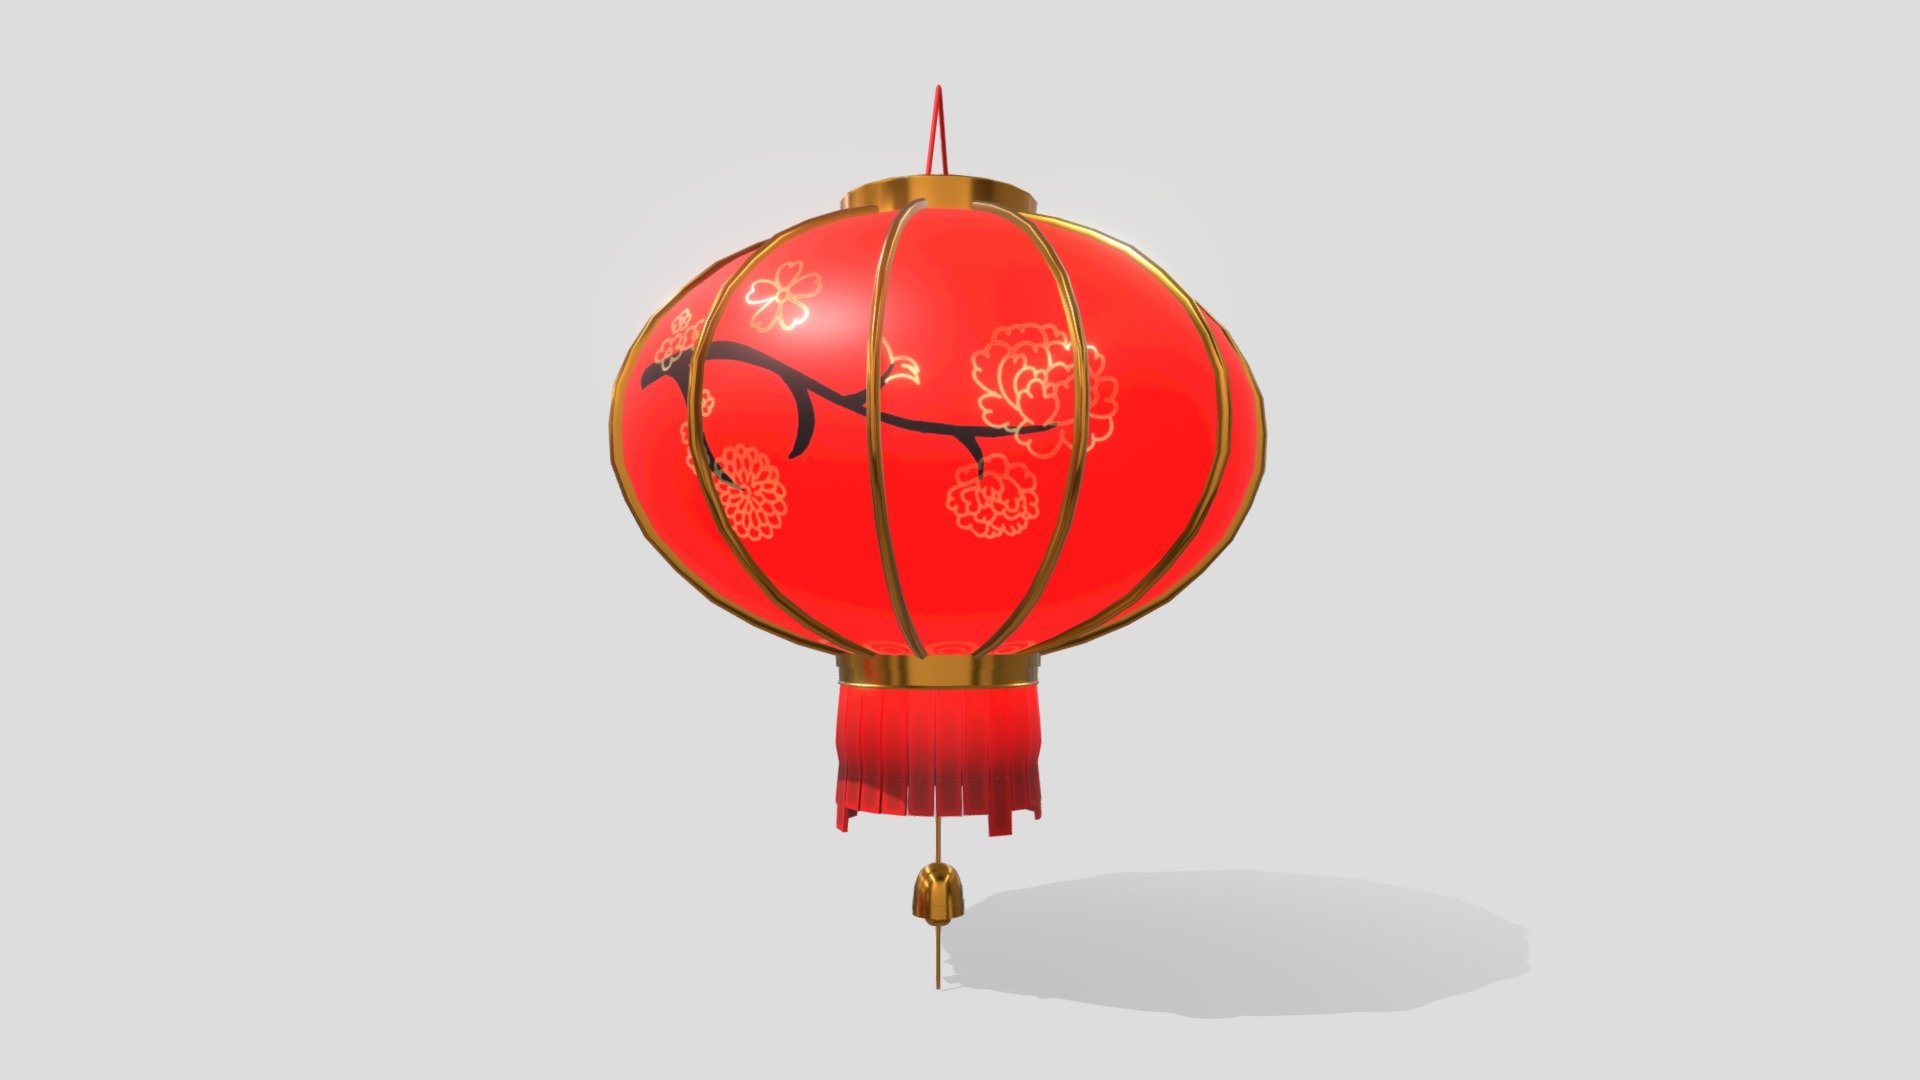 Stylised decorative hanging red lantern, used during the Chinese New Year celebrations.

Login to STB’s Tourism Information &amp; Services Hub for free downloads:
https://tih.stb.gov.sg/content/tih/en/marketing-and-media-assets/digital-images-andvideoslisting/digital-images-and-videos-detail.1042a4947059be6444786d74ca7a45f6b1f.Chinese+Lantern.html - Chinese Lantern - 3D model by STB-TC 3d model